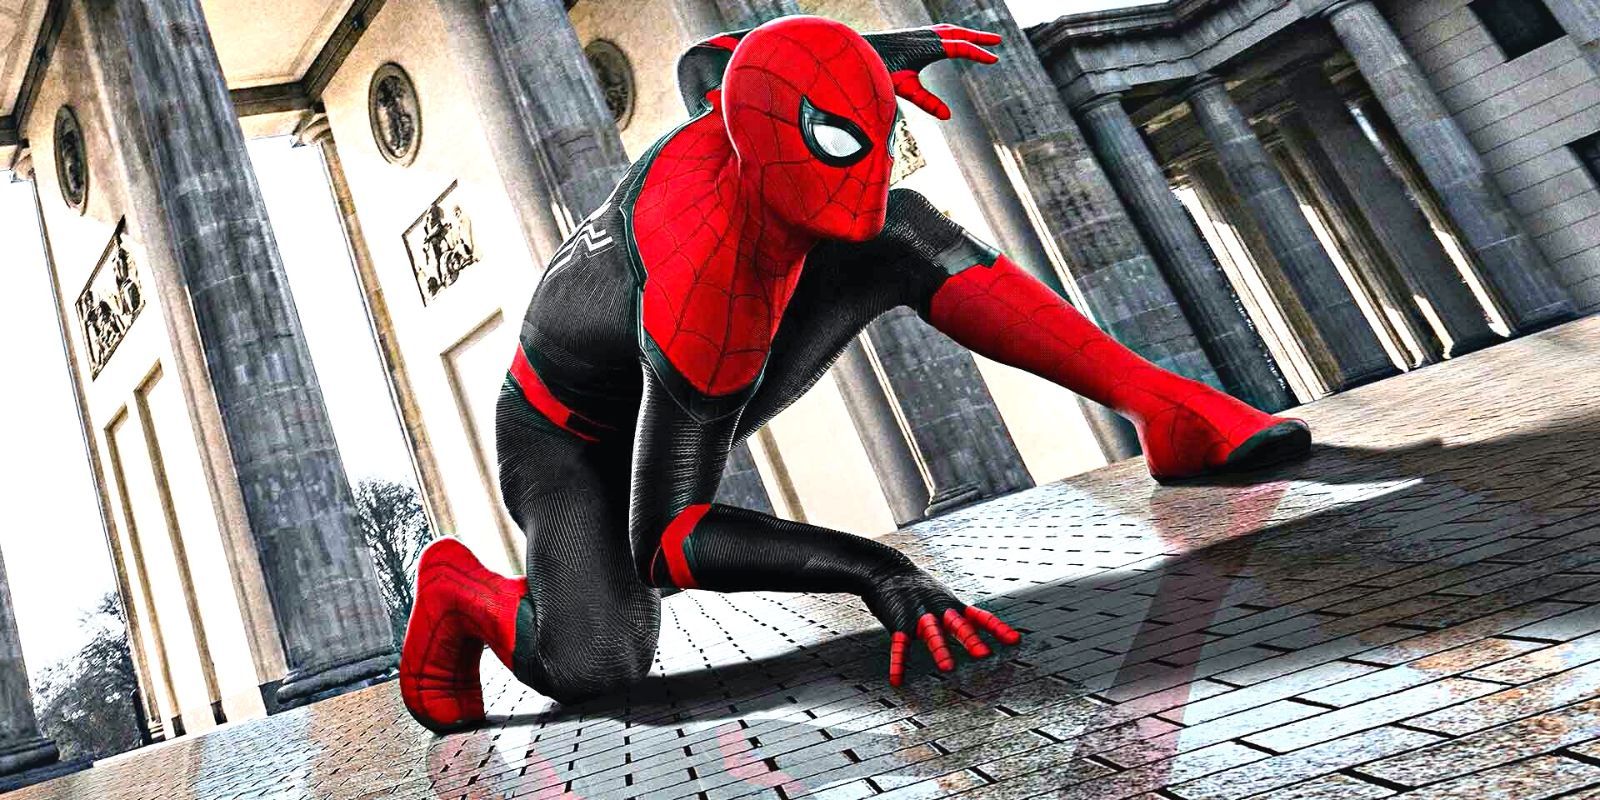 Tom Holland's Spider-Man crouching, ready for action